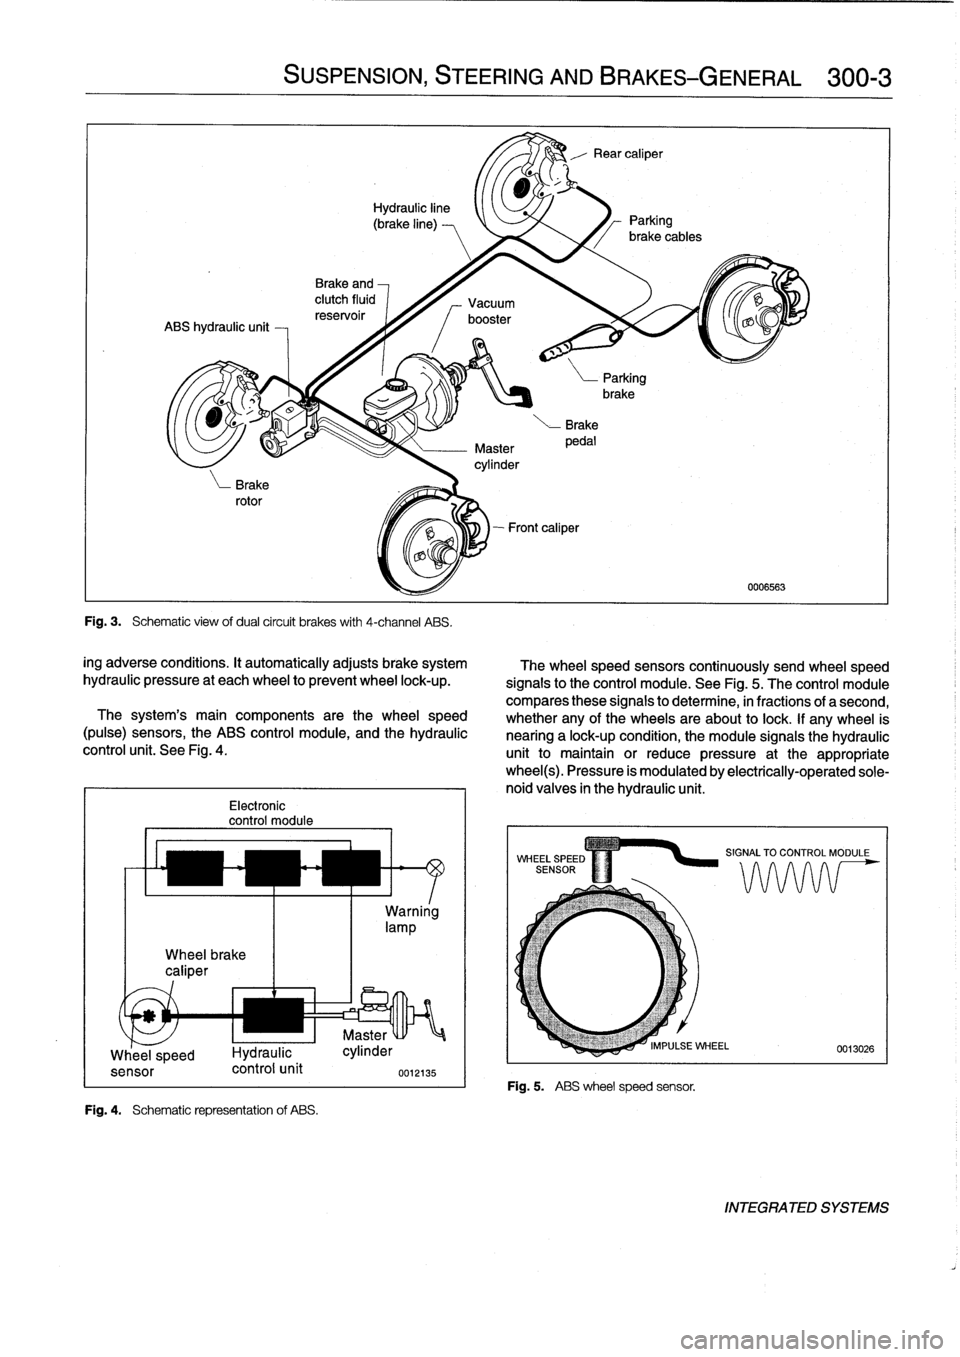 BMW 323i 1998 E36 Owners Manual 
Wheel
brake
caliper

Electronic
control
module
Fig
.
4
.

	

Schematic
representation
of
ABS
.

SUSPENSION,
STEERING
ANDBRAKES-GENERAL

	

300-3

Fig
.
3
.

	

Schematic
view
ofdual
circuit
brakes
wi